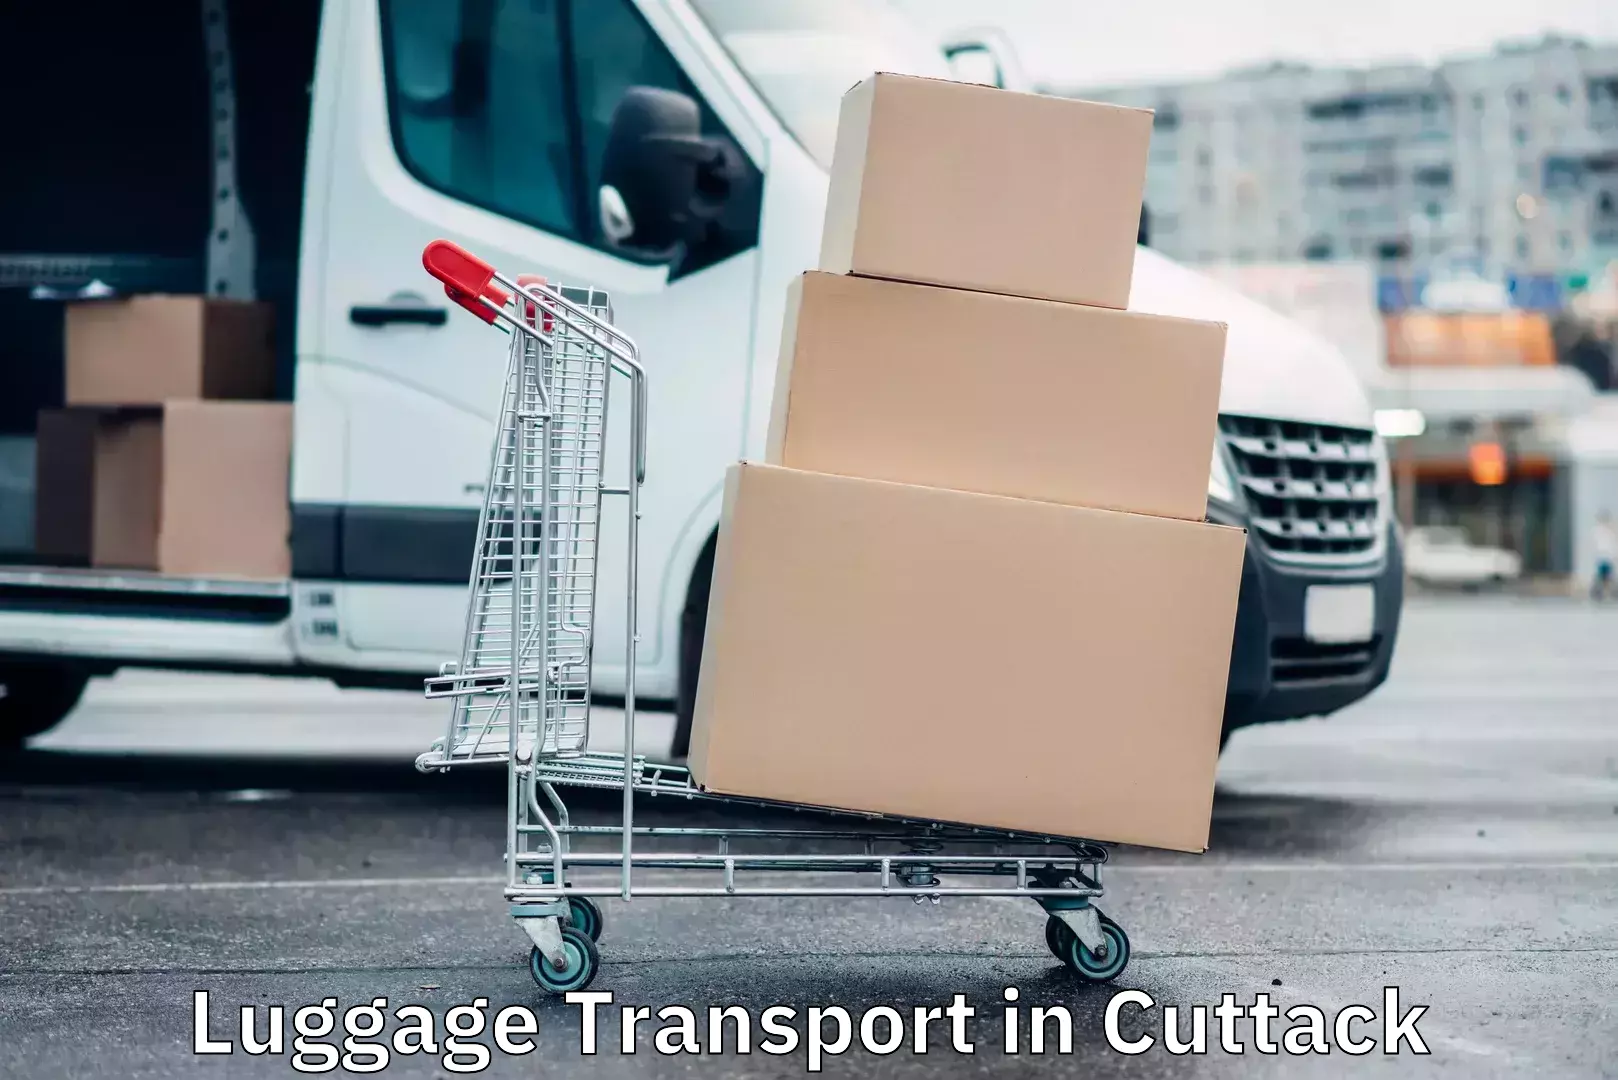 Business luggage transport in Cuttack